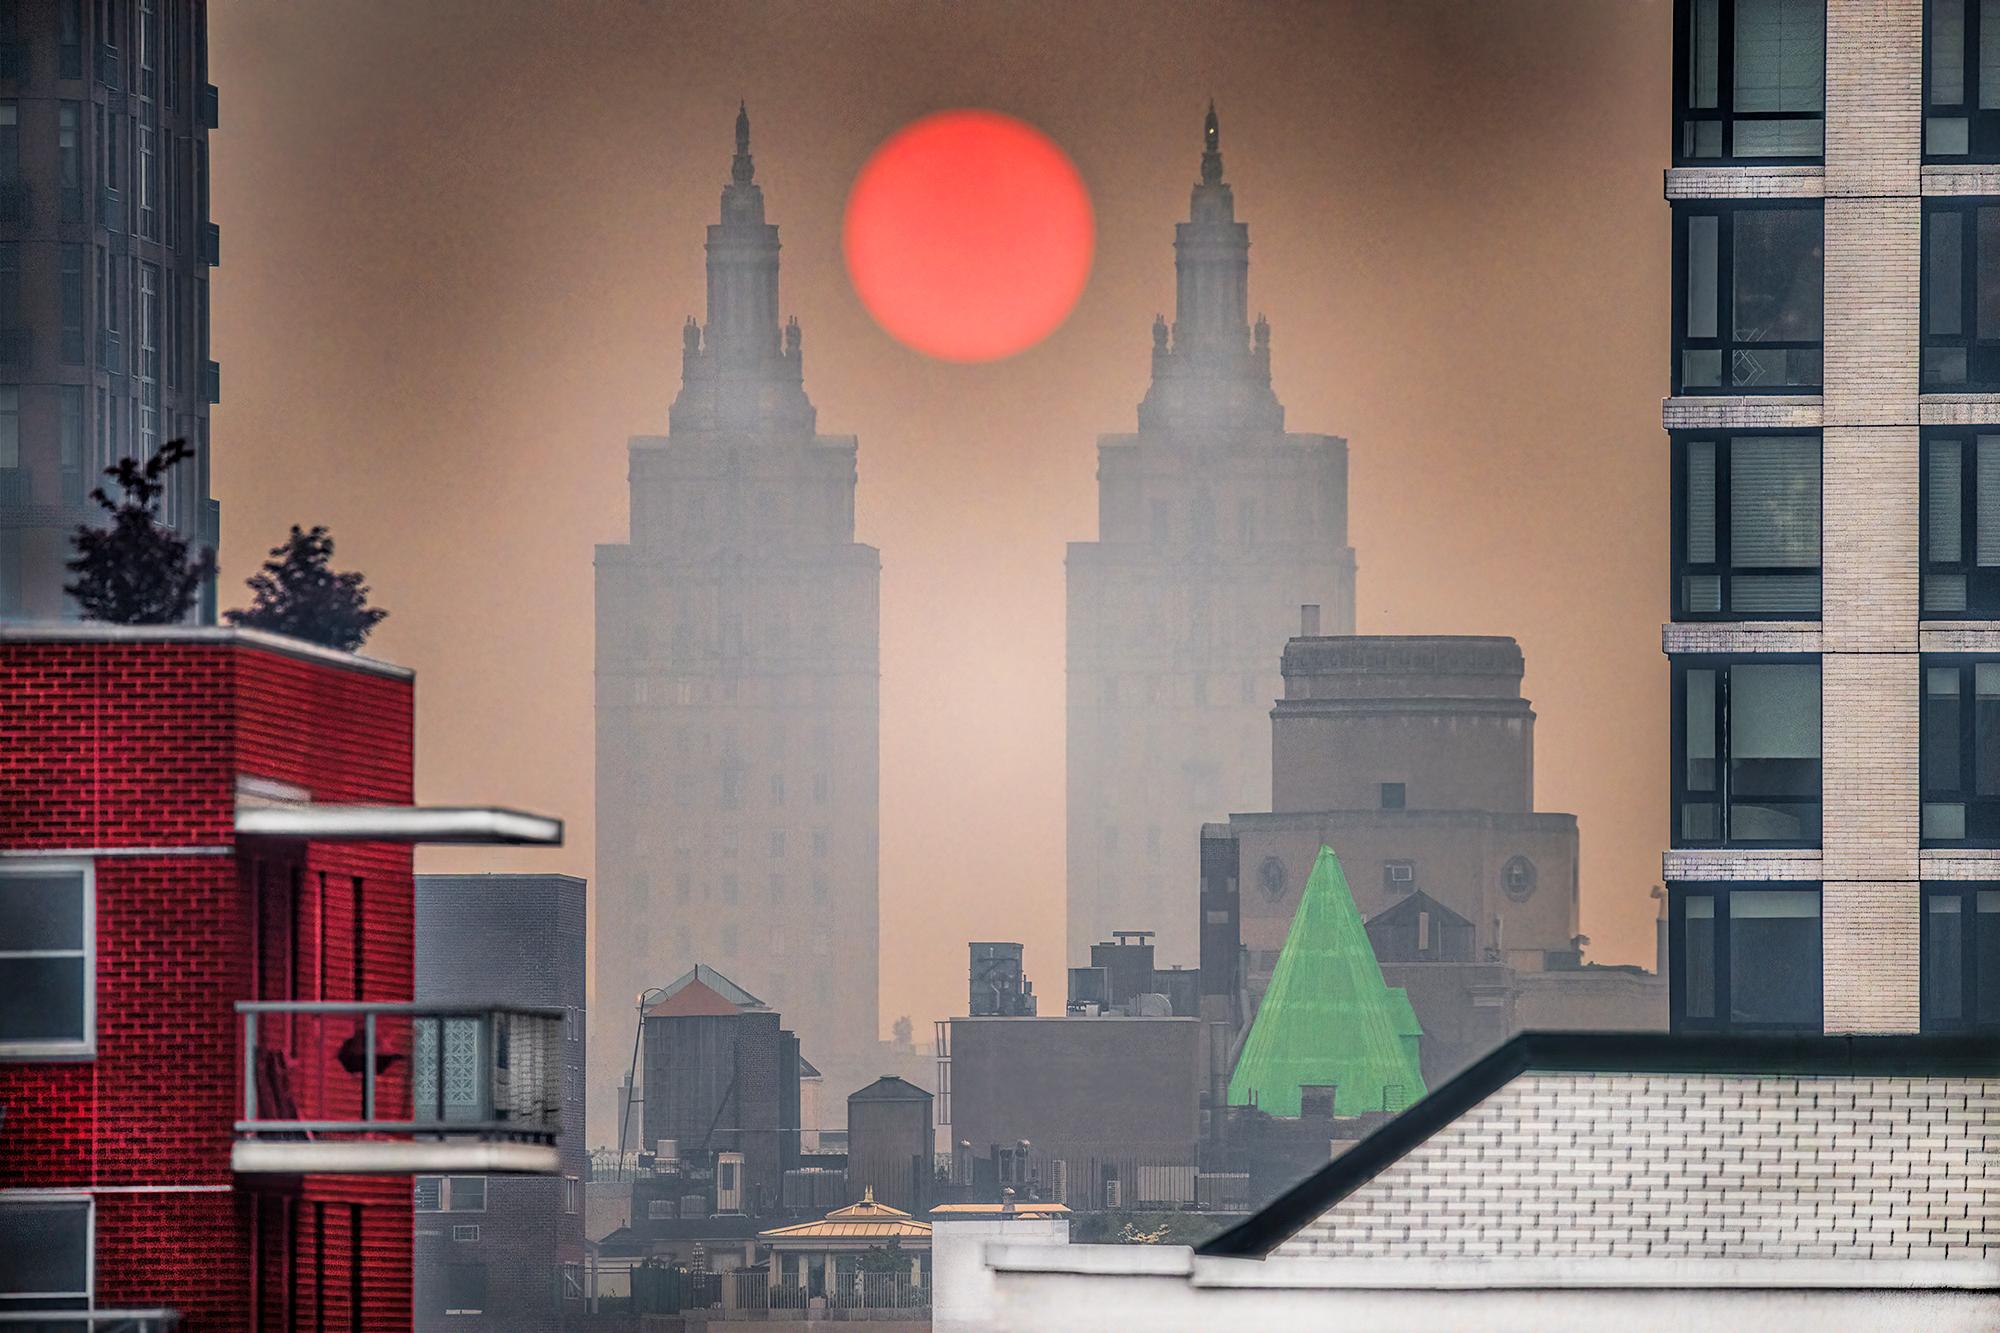 Mitchell Funk Color Photograph - New York City Hazy Day, Central Park West Towers Cradle Orange Red Sun